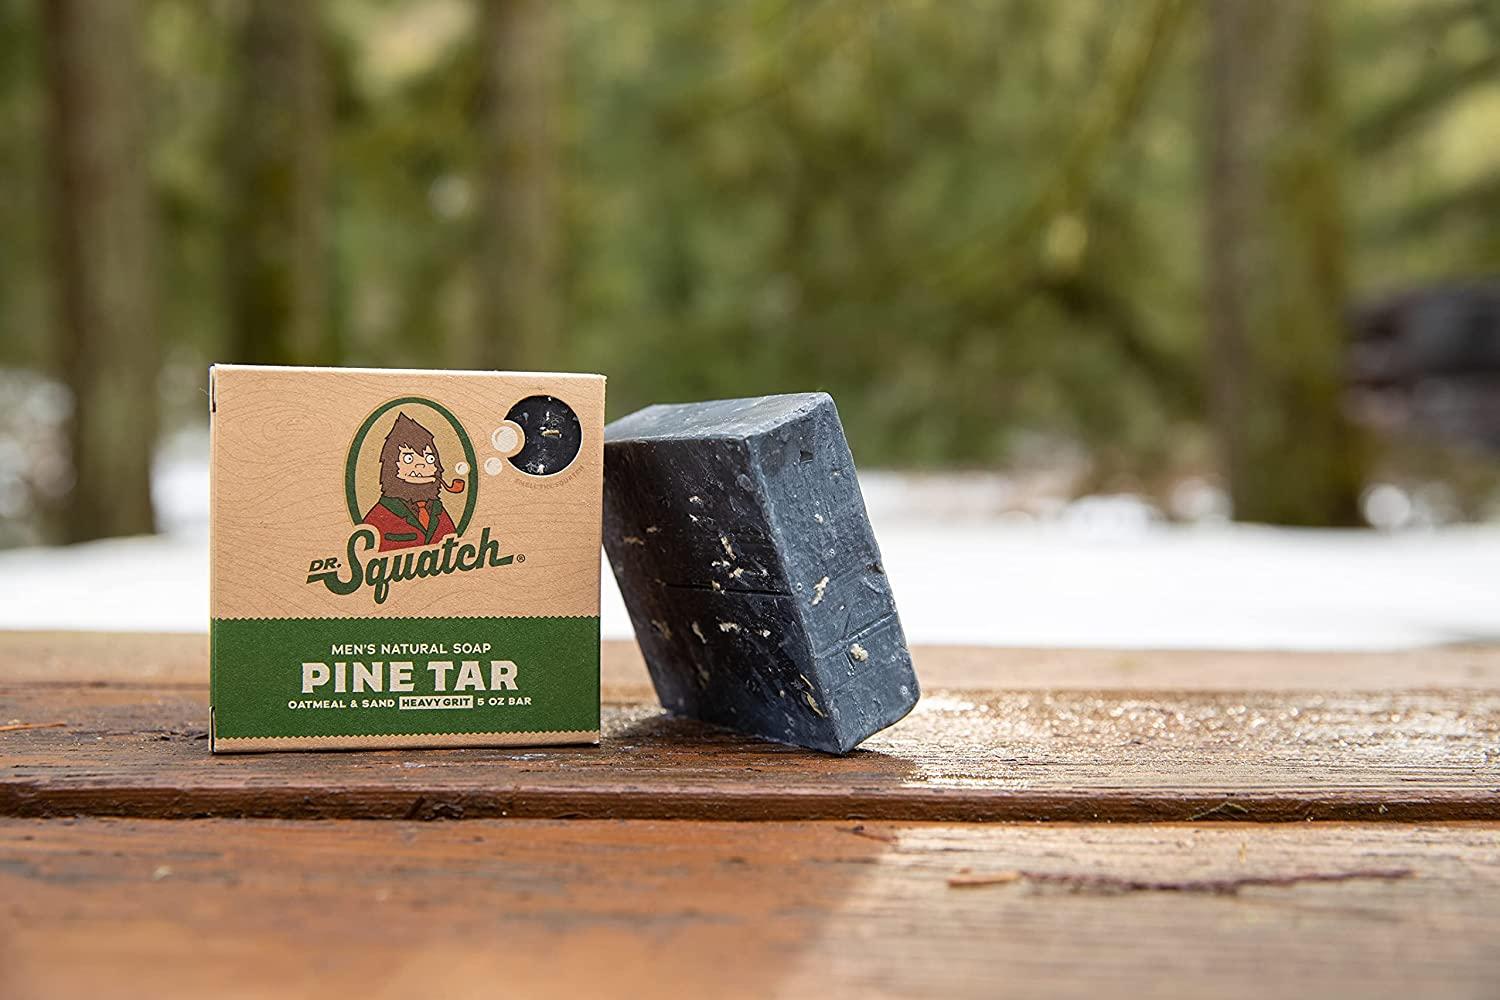 Dr. Squatch Manly Soap and Deodorant Variety Pack - Handmade with Organic  Oils, Aluminum-Free - Pine Tar and Alpine Sage